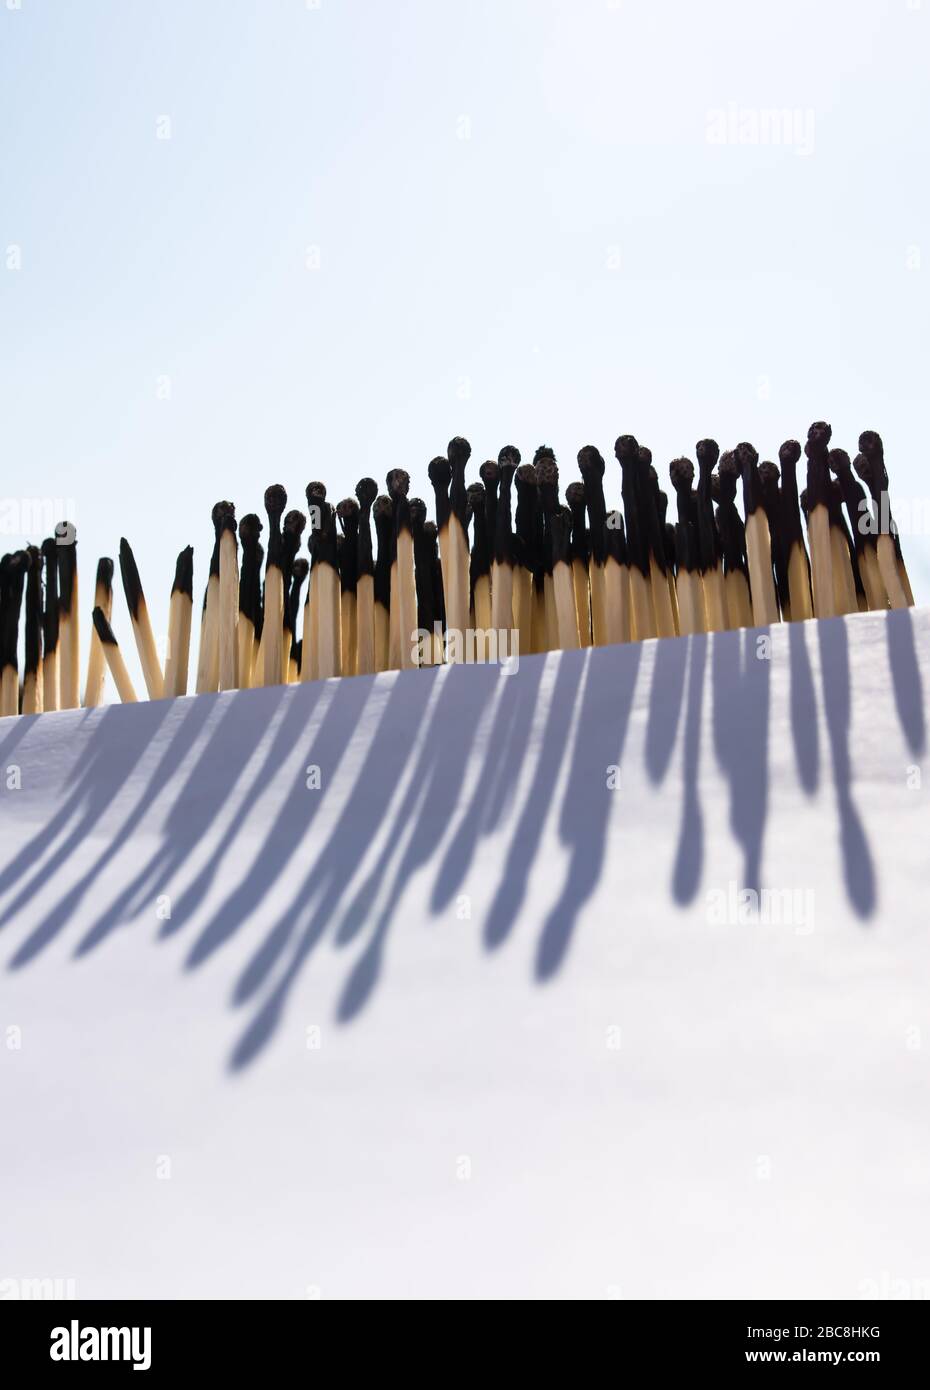 Burnt many matchstick, and long shadows. Stay at home, stop Coronavirus epidemic, keep social distance in curfew. Concept: matchstick domino effect, C Stock Photo